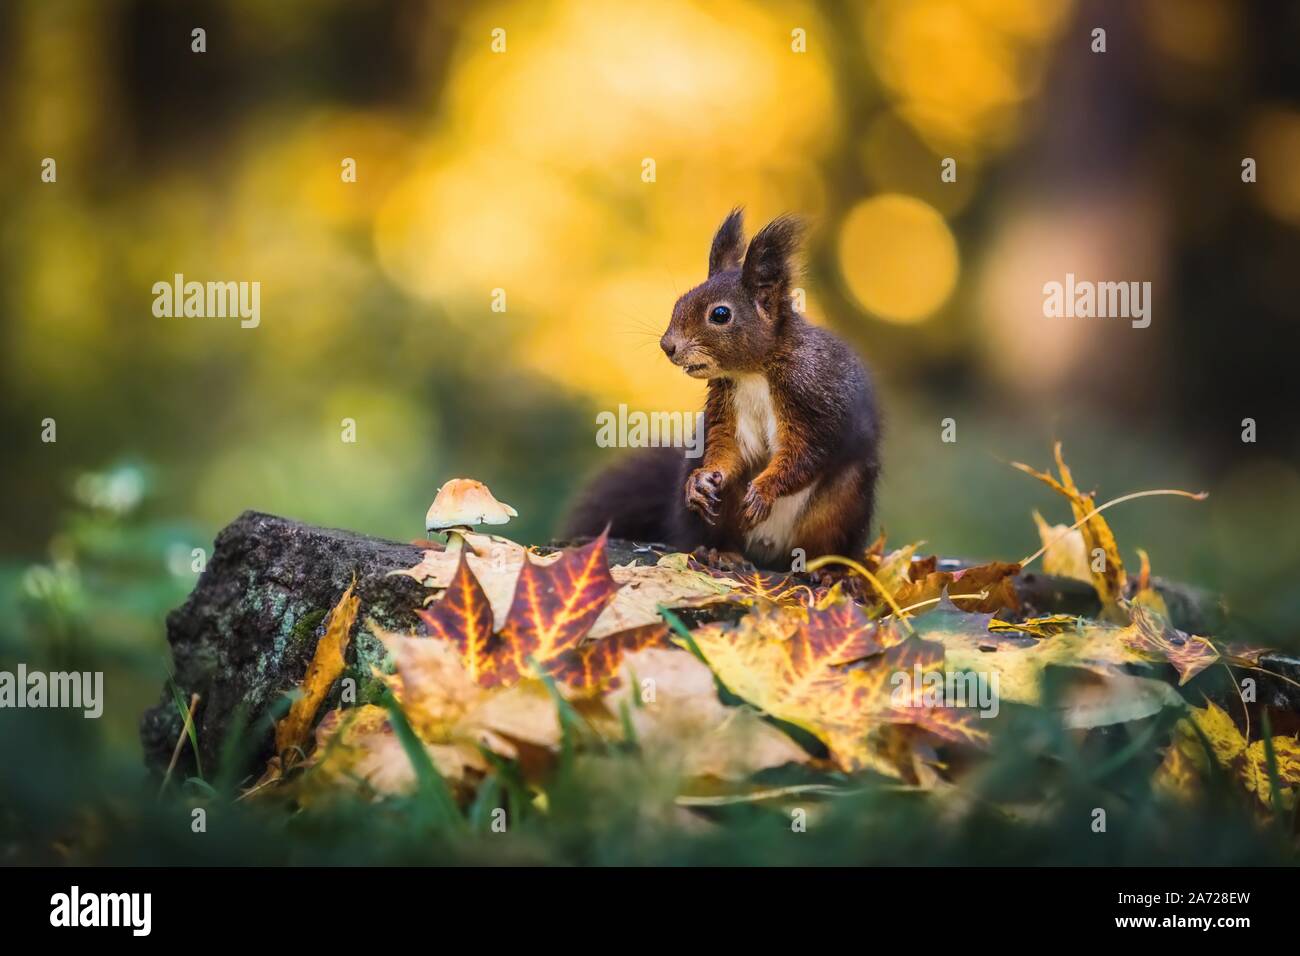 Cute red squirrel sitting on a tree stump covered with colorful leaves and a growing mushroom. Autumn day in a dark forest. Blurry yellow background. Stock Photo